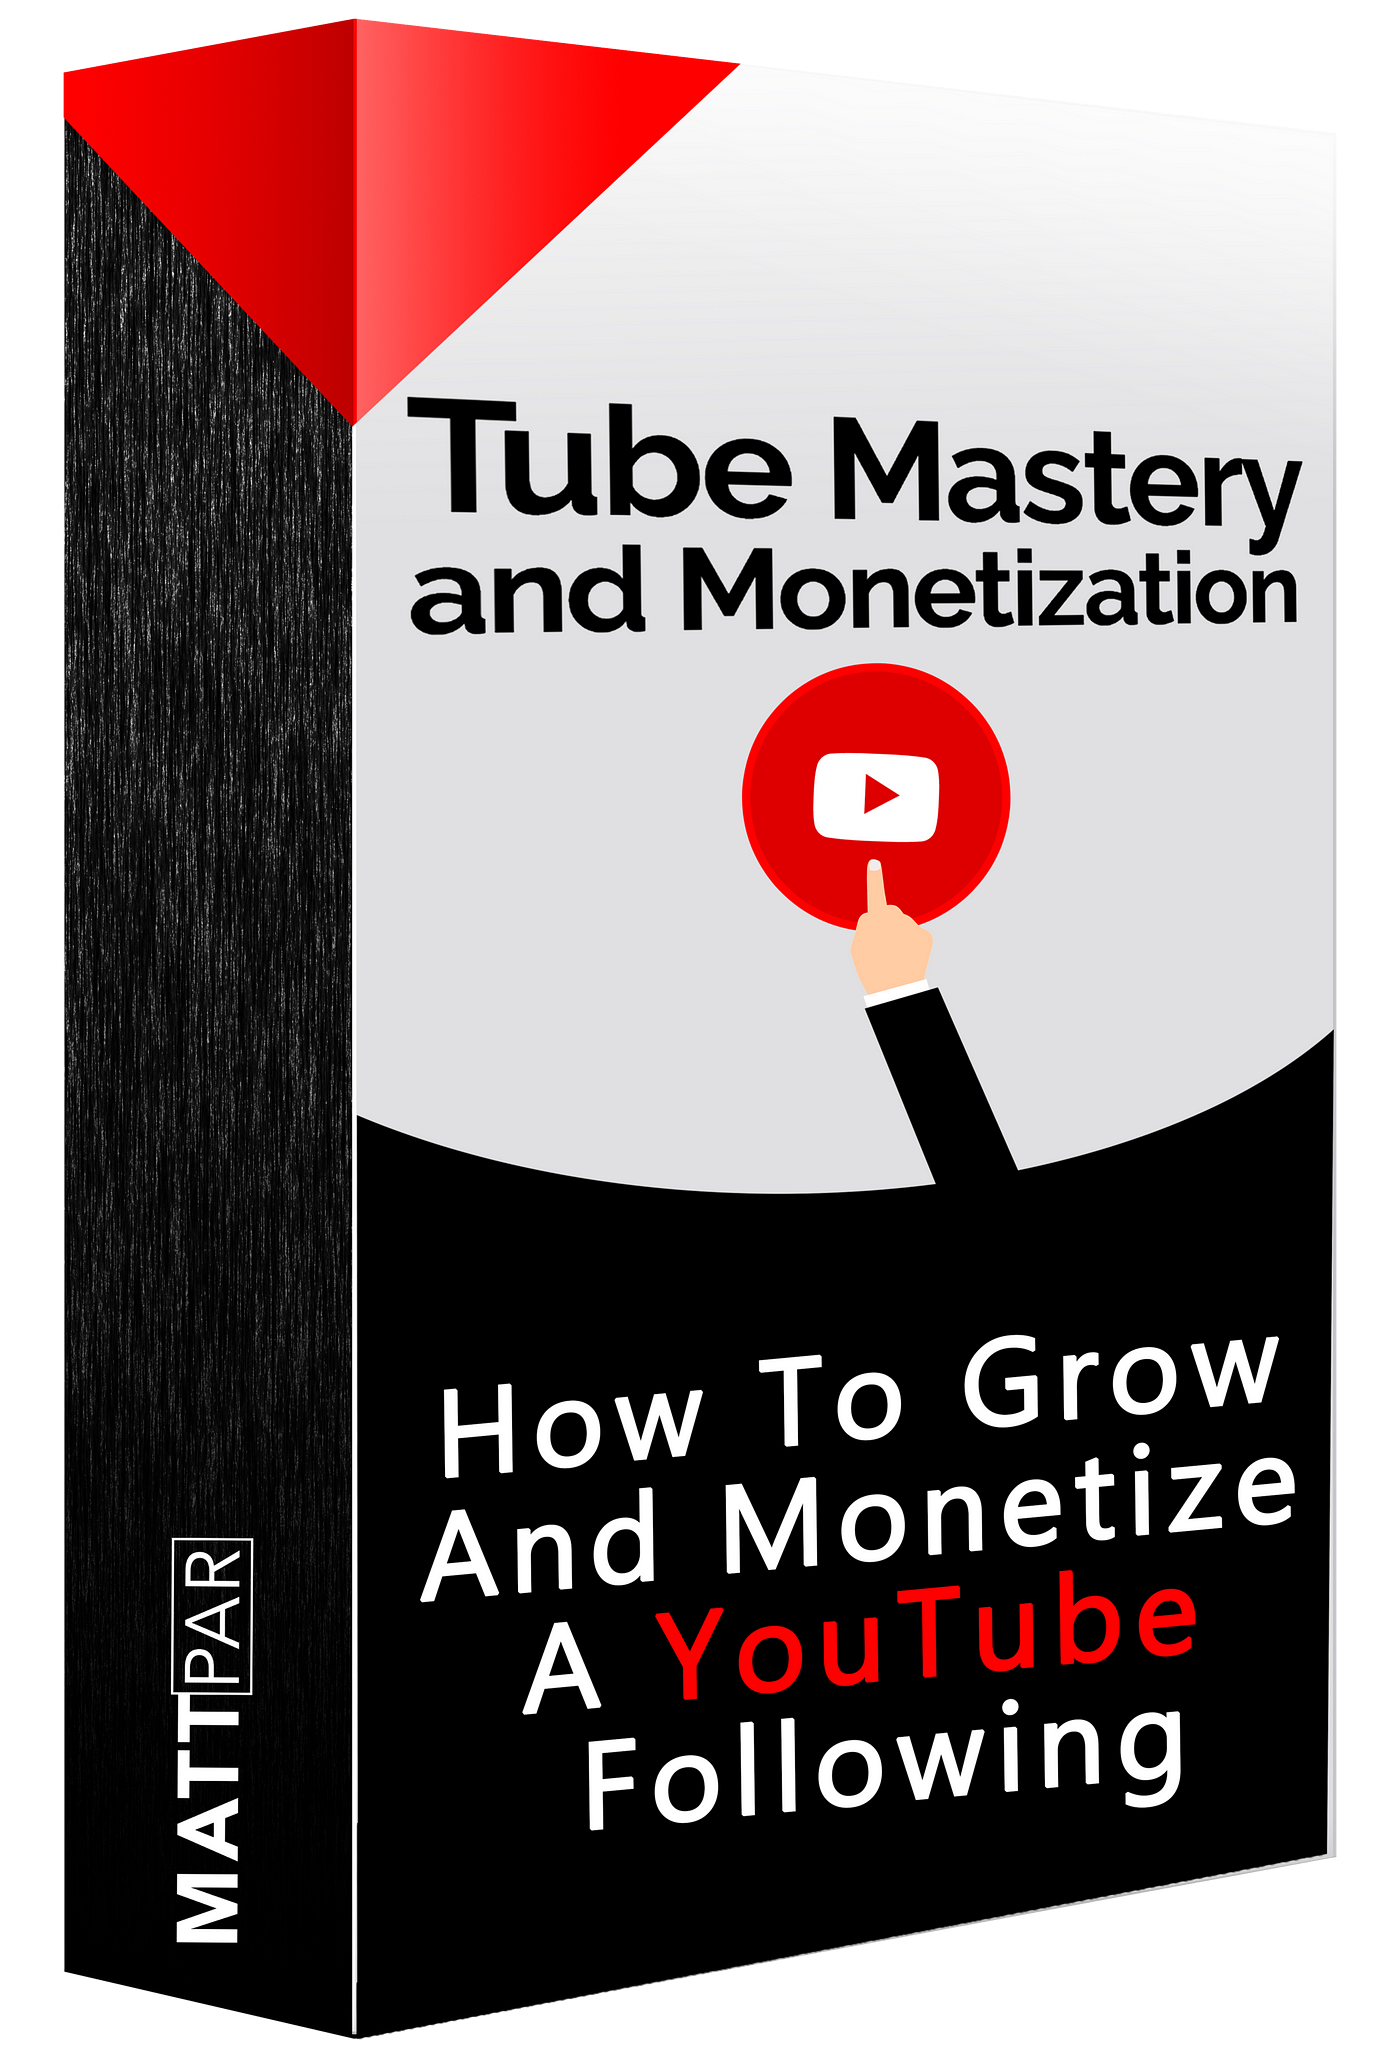 Tube Mastery and Monetization by Matt Par :“How I Run 9 Different Profitable YouTube Channels and…